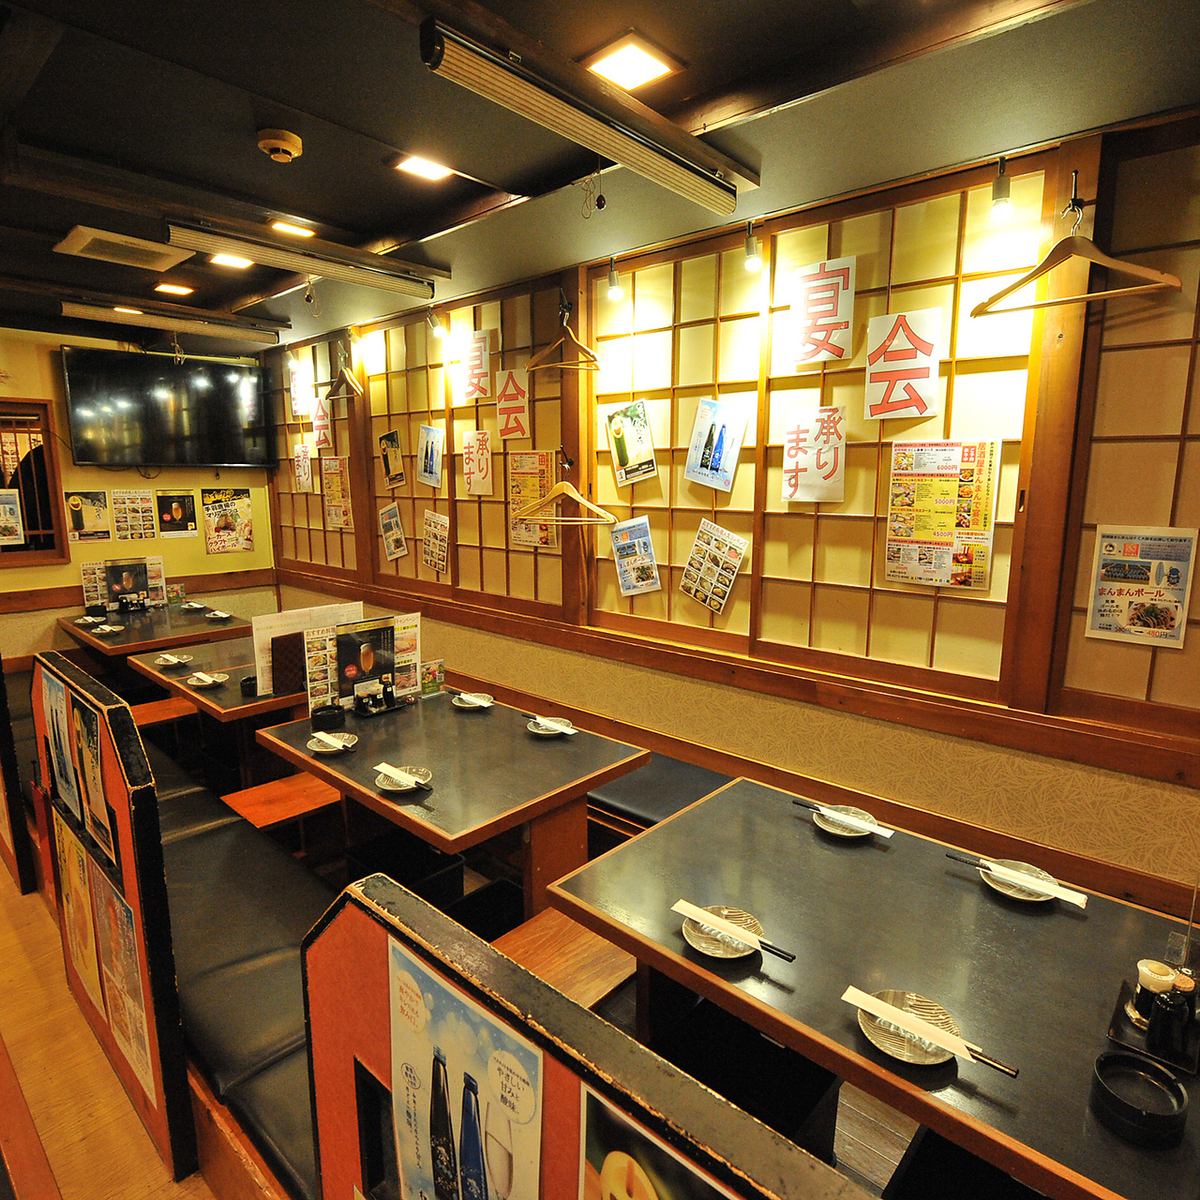 [Horigotatsu seating] We have a small sunken kotatsu seating area that can seat 20 people.